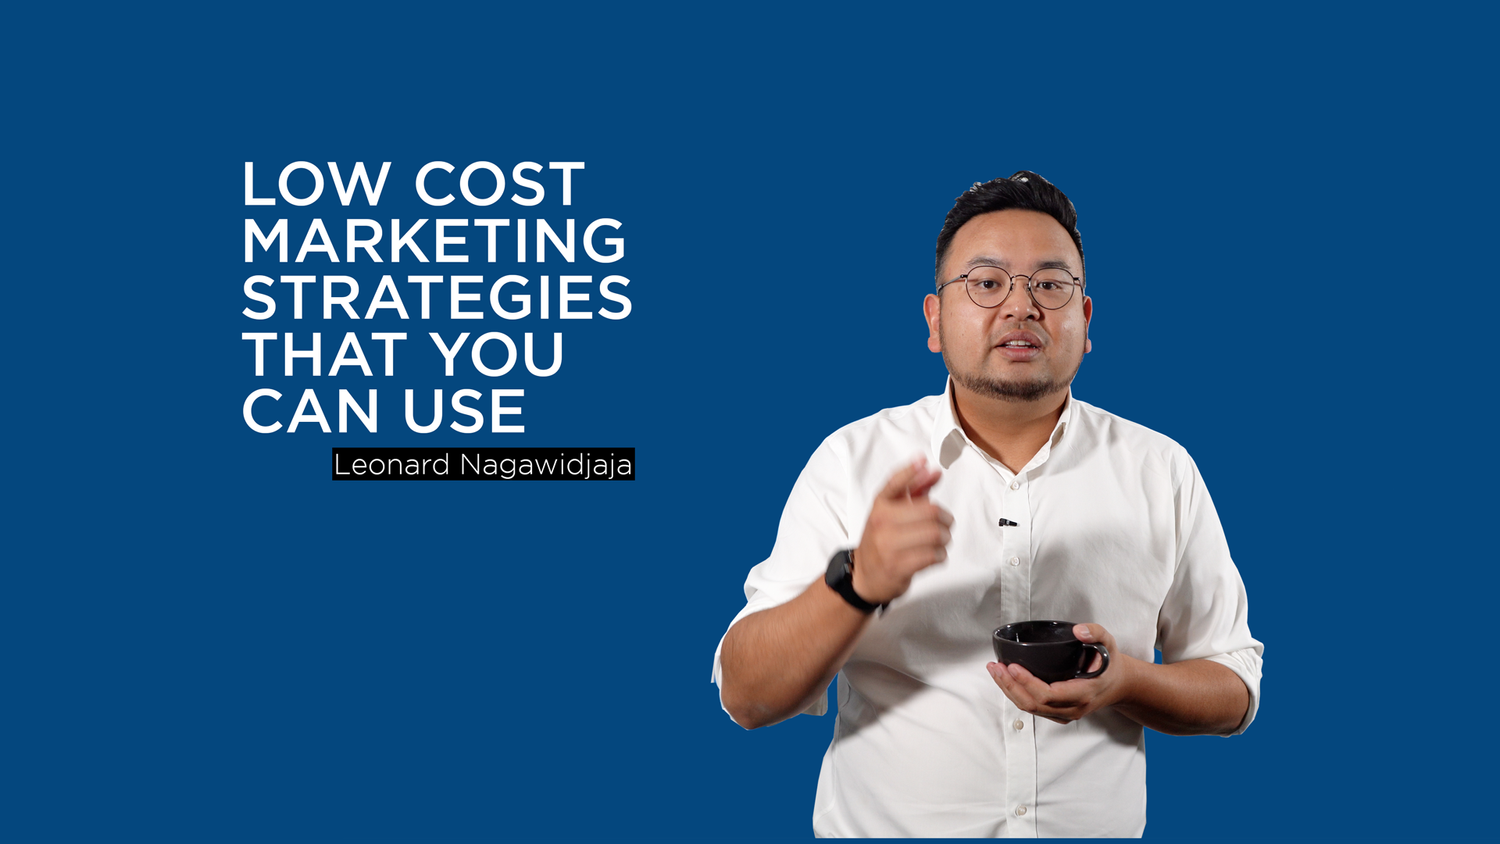 Low Cost Marketing Strategies That You Can Use